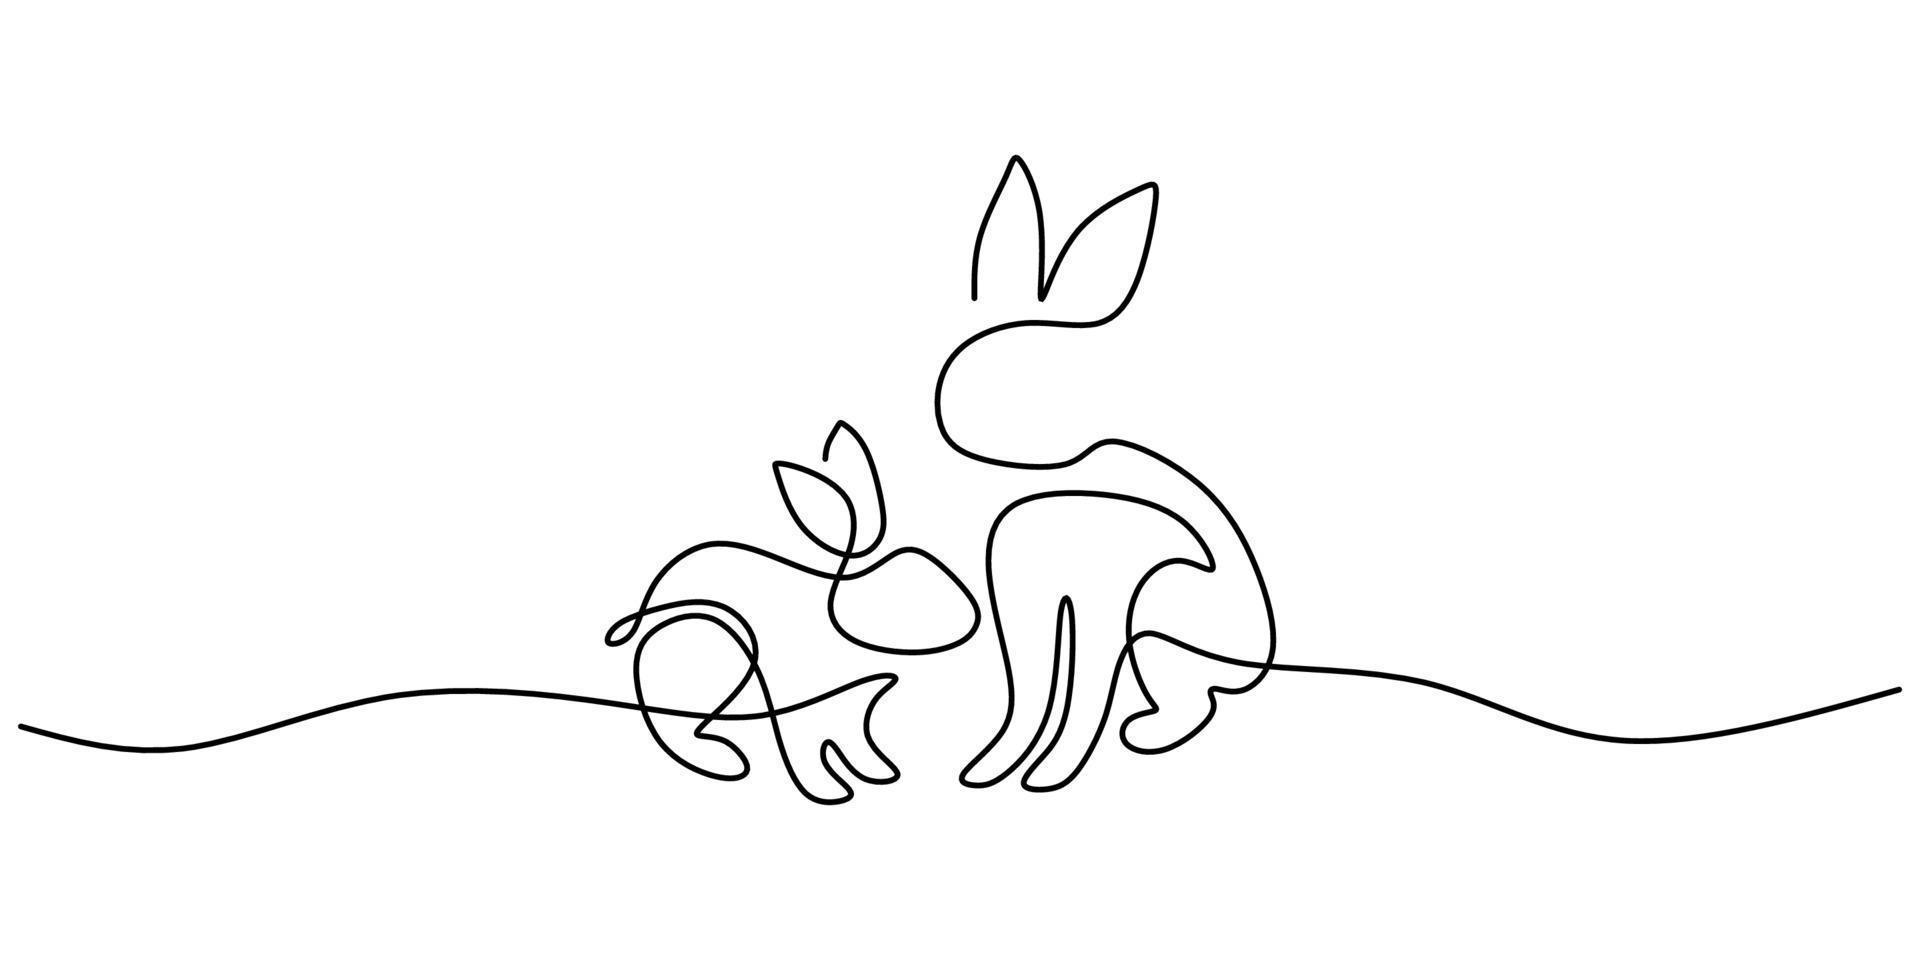 Continuous one single line of two cute rabbits vector